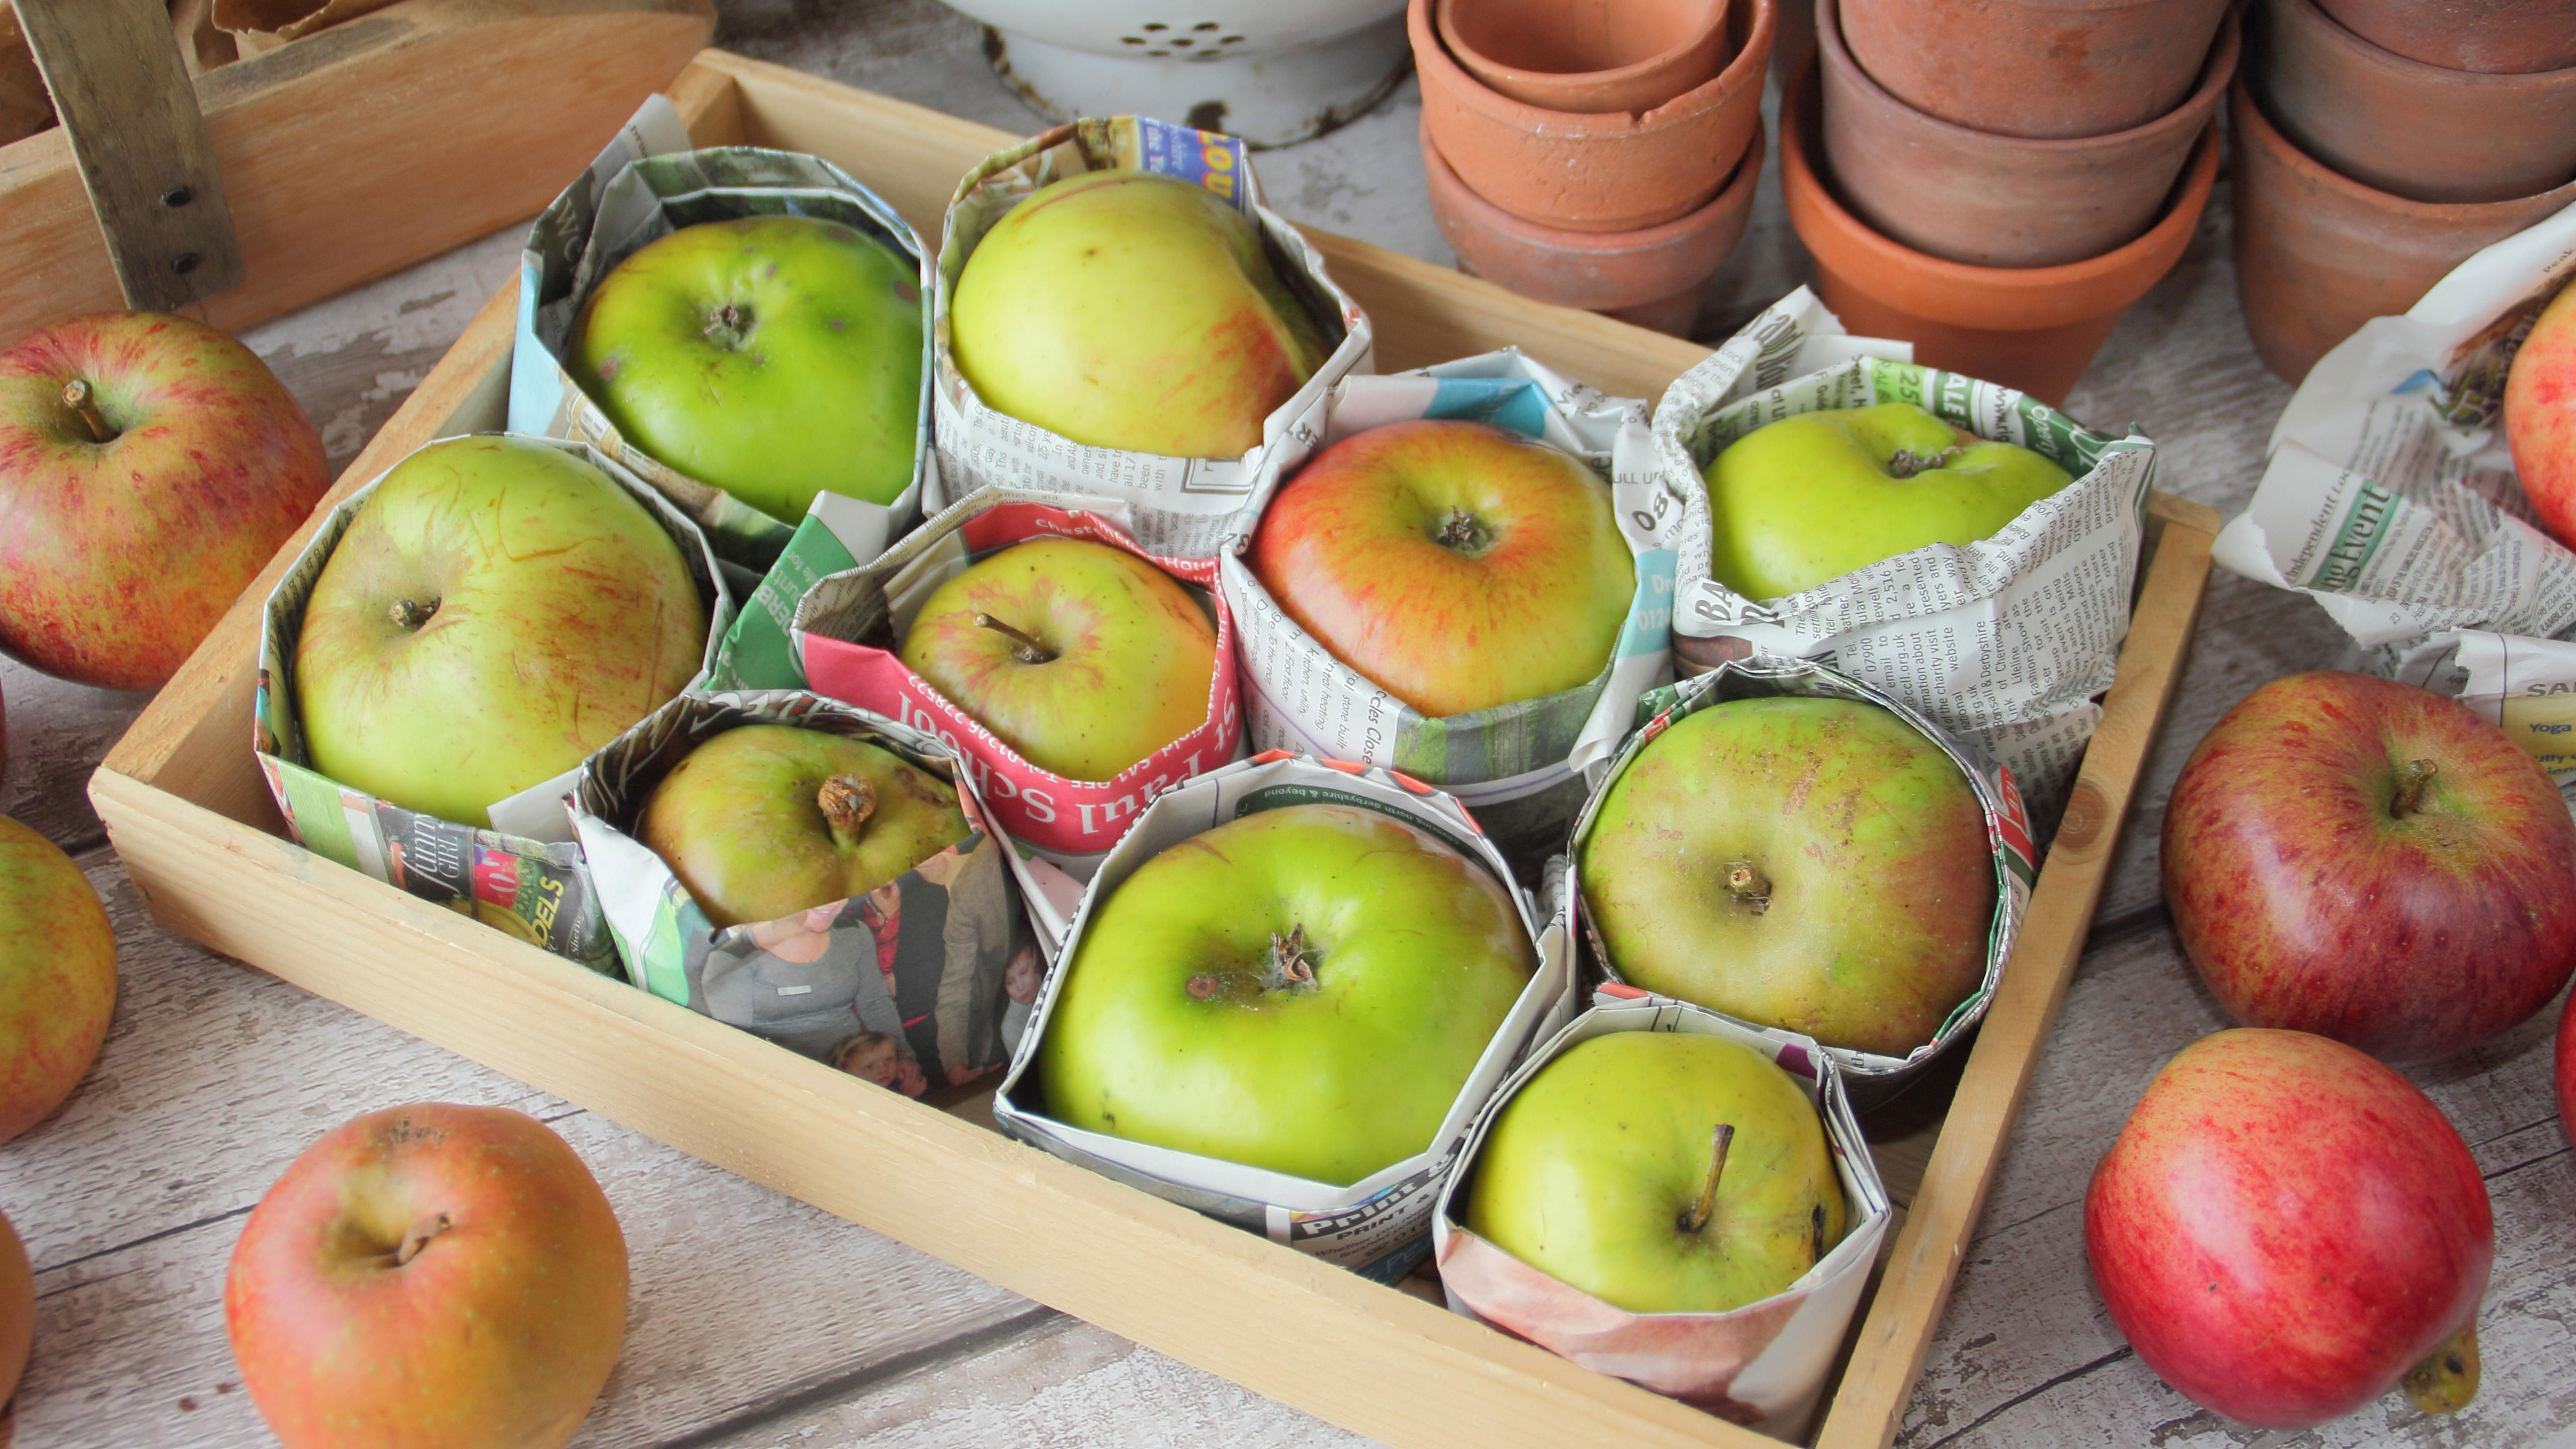 How to store apples: to keep them perfectly fresh for longer